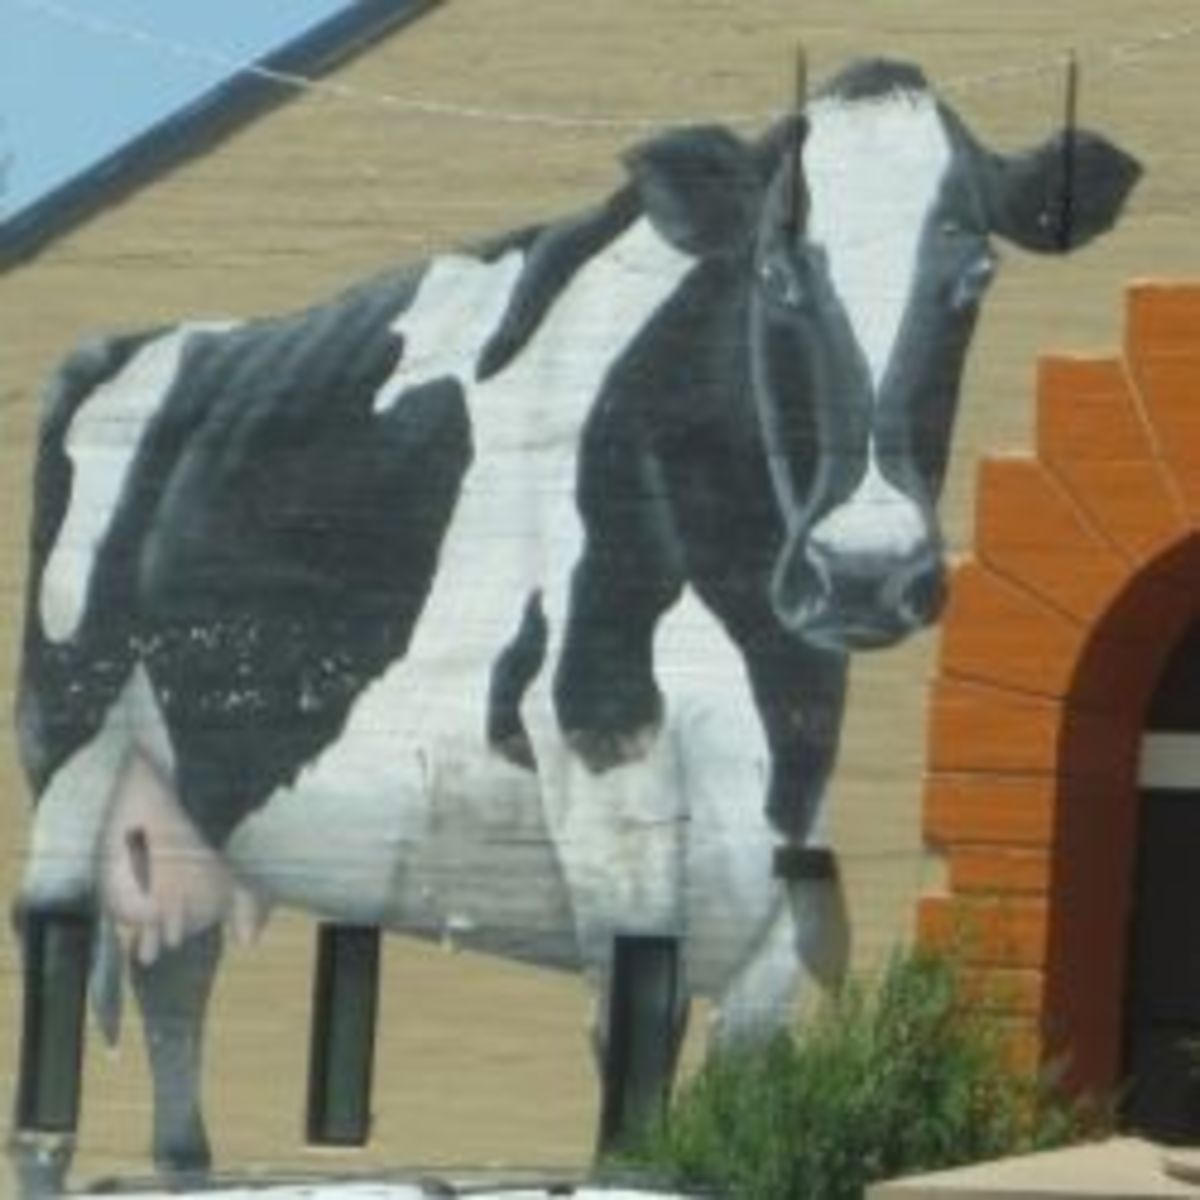 The Flagstaff Furniture Barn Natural Grocers Big Cow Mural